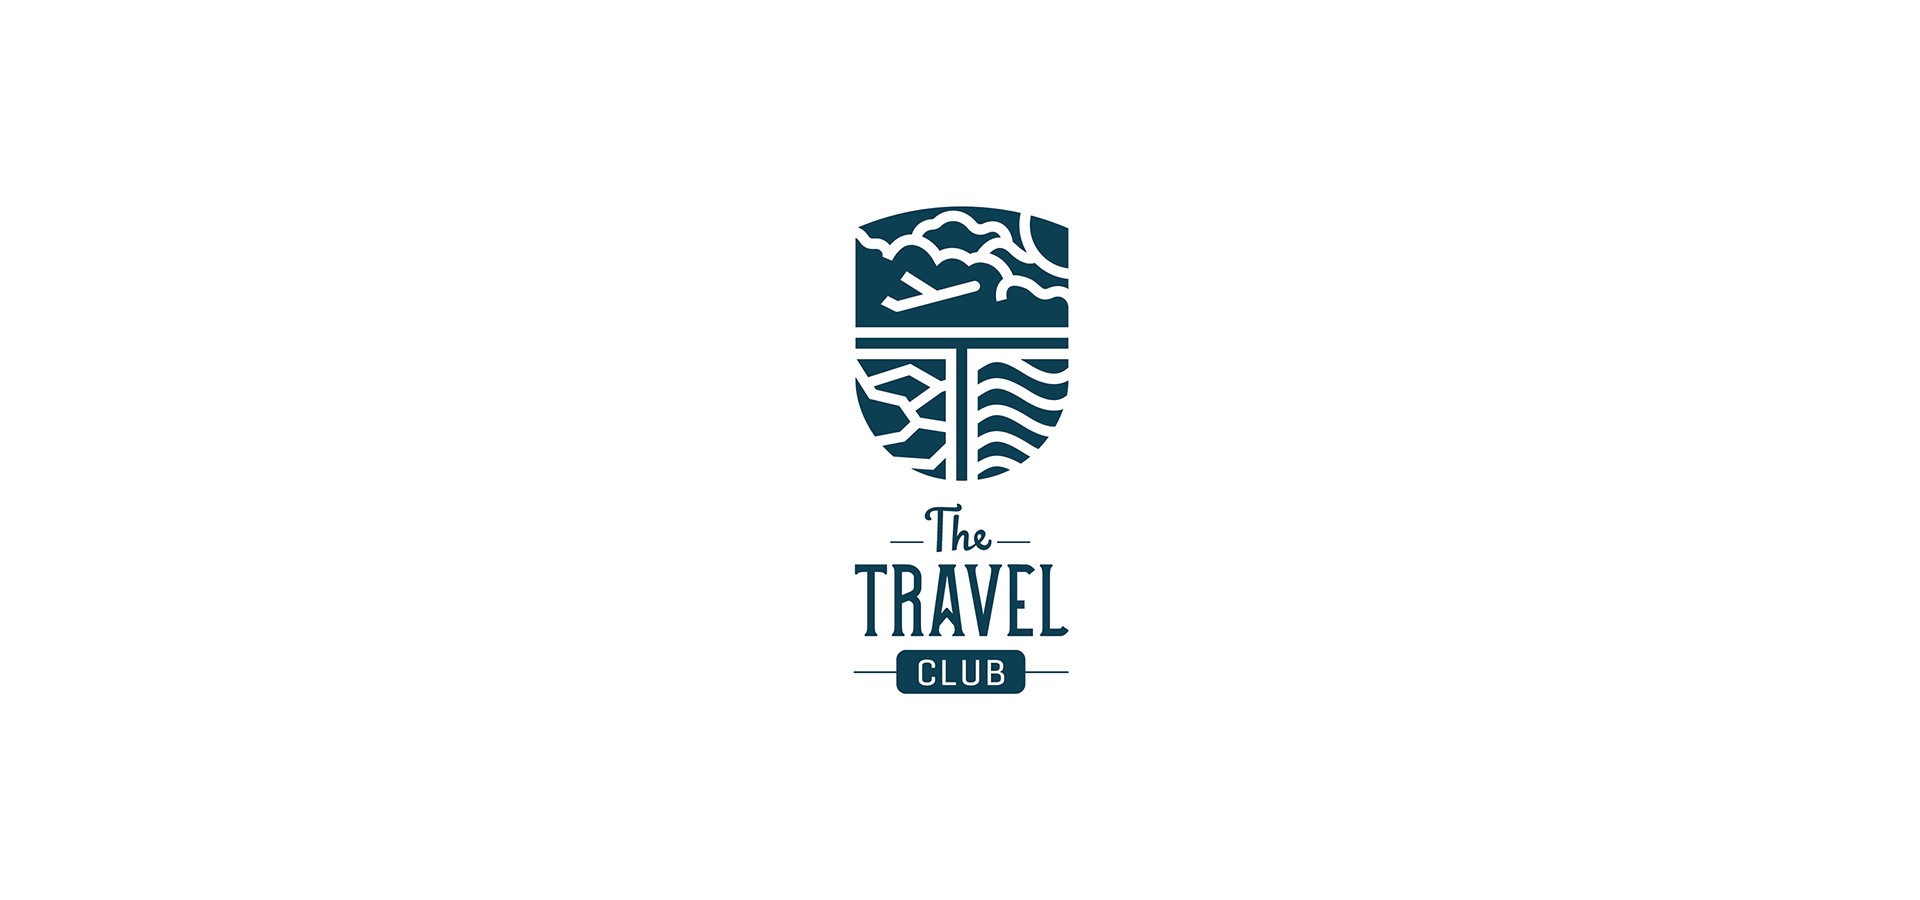 The Travel Club. Branding and new identity